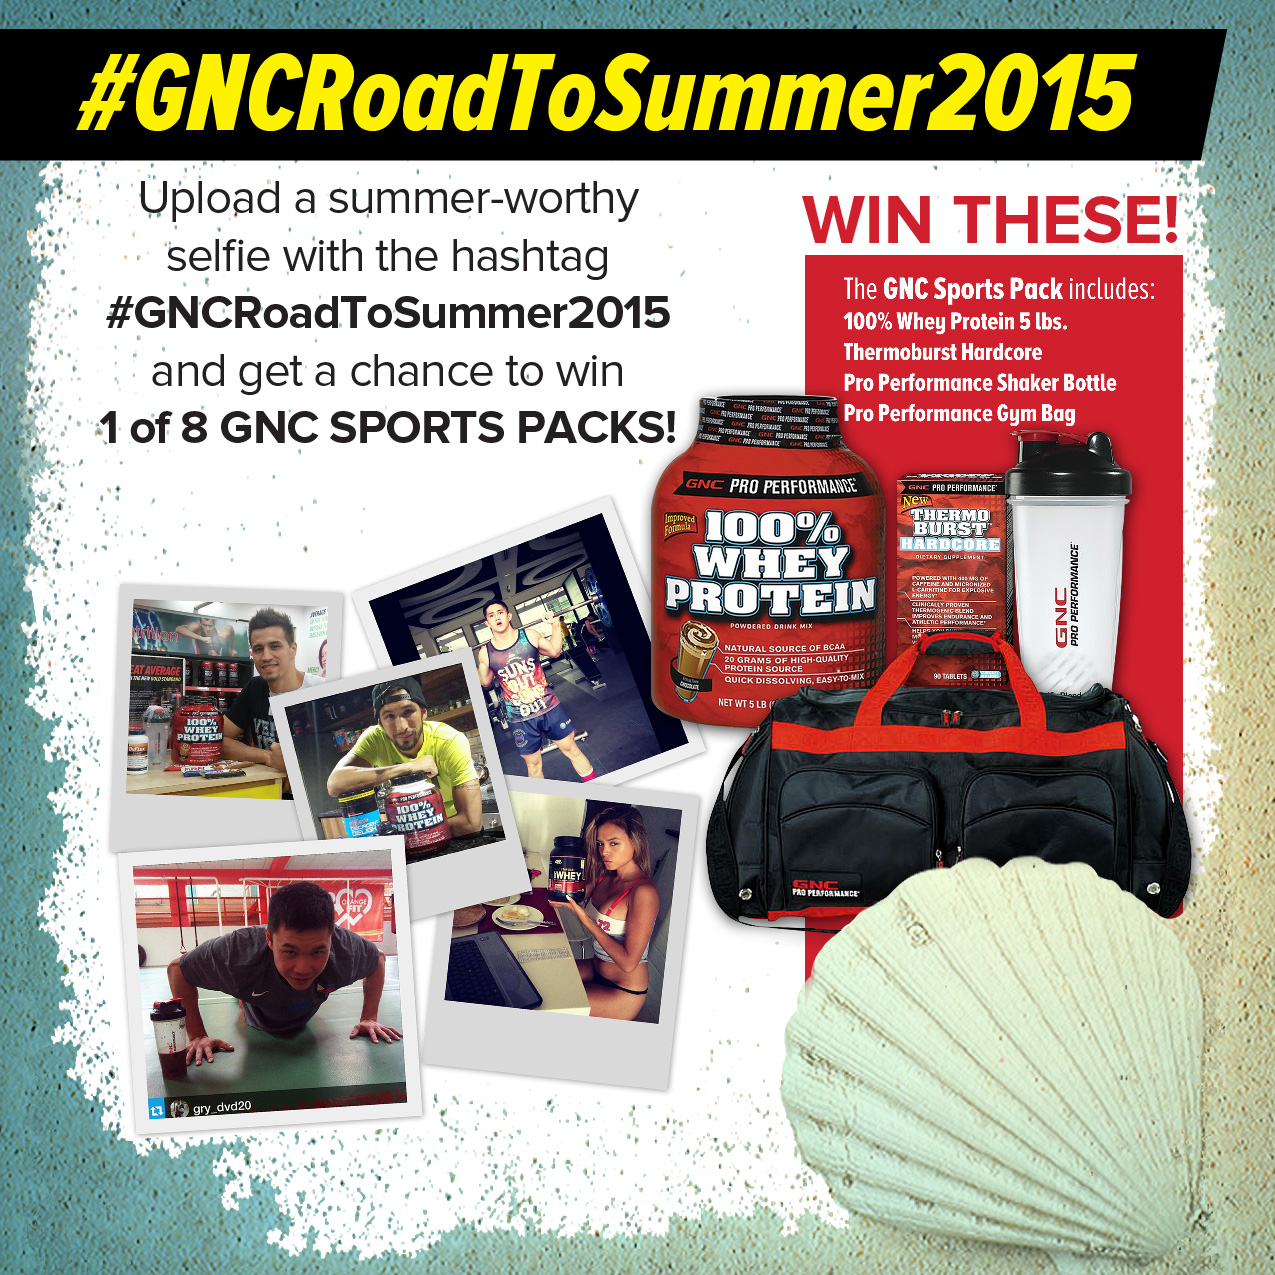 GNC Road to Summer Win a sports pack 2015 Selfies